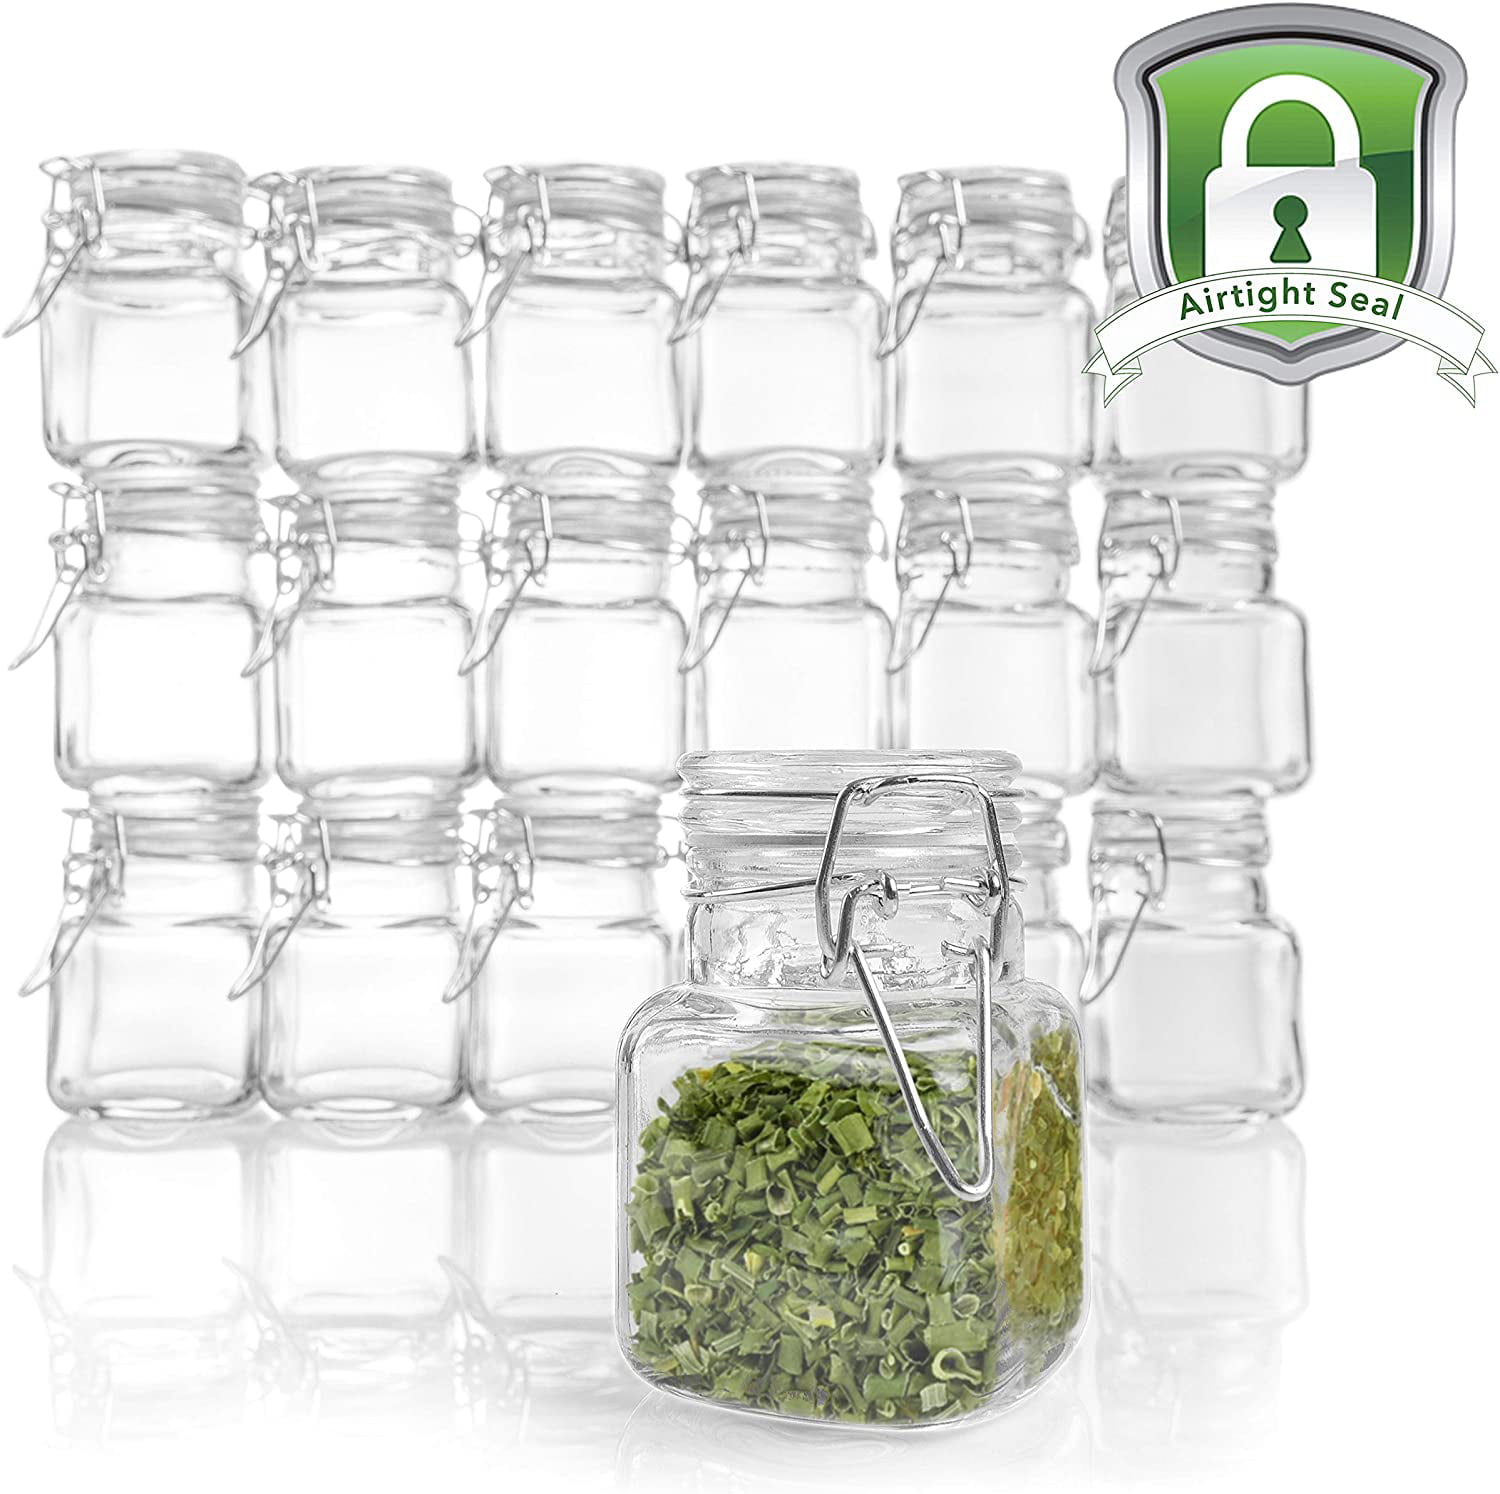 Stock Your Home 3 Oz Airtight Glass Jar with Leak Proof Rubber Gasket and  Hinged Lid for Home and Kitchen, Multi-purpose Container for Herbs, Spices,  Arts and Crafts Storage and Gift Holder